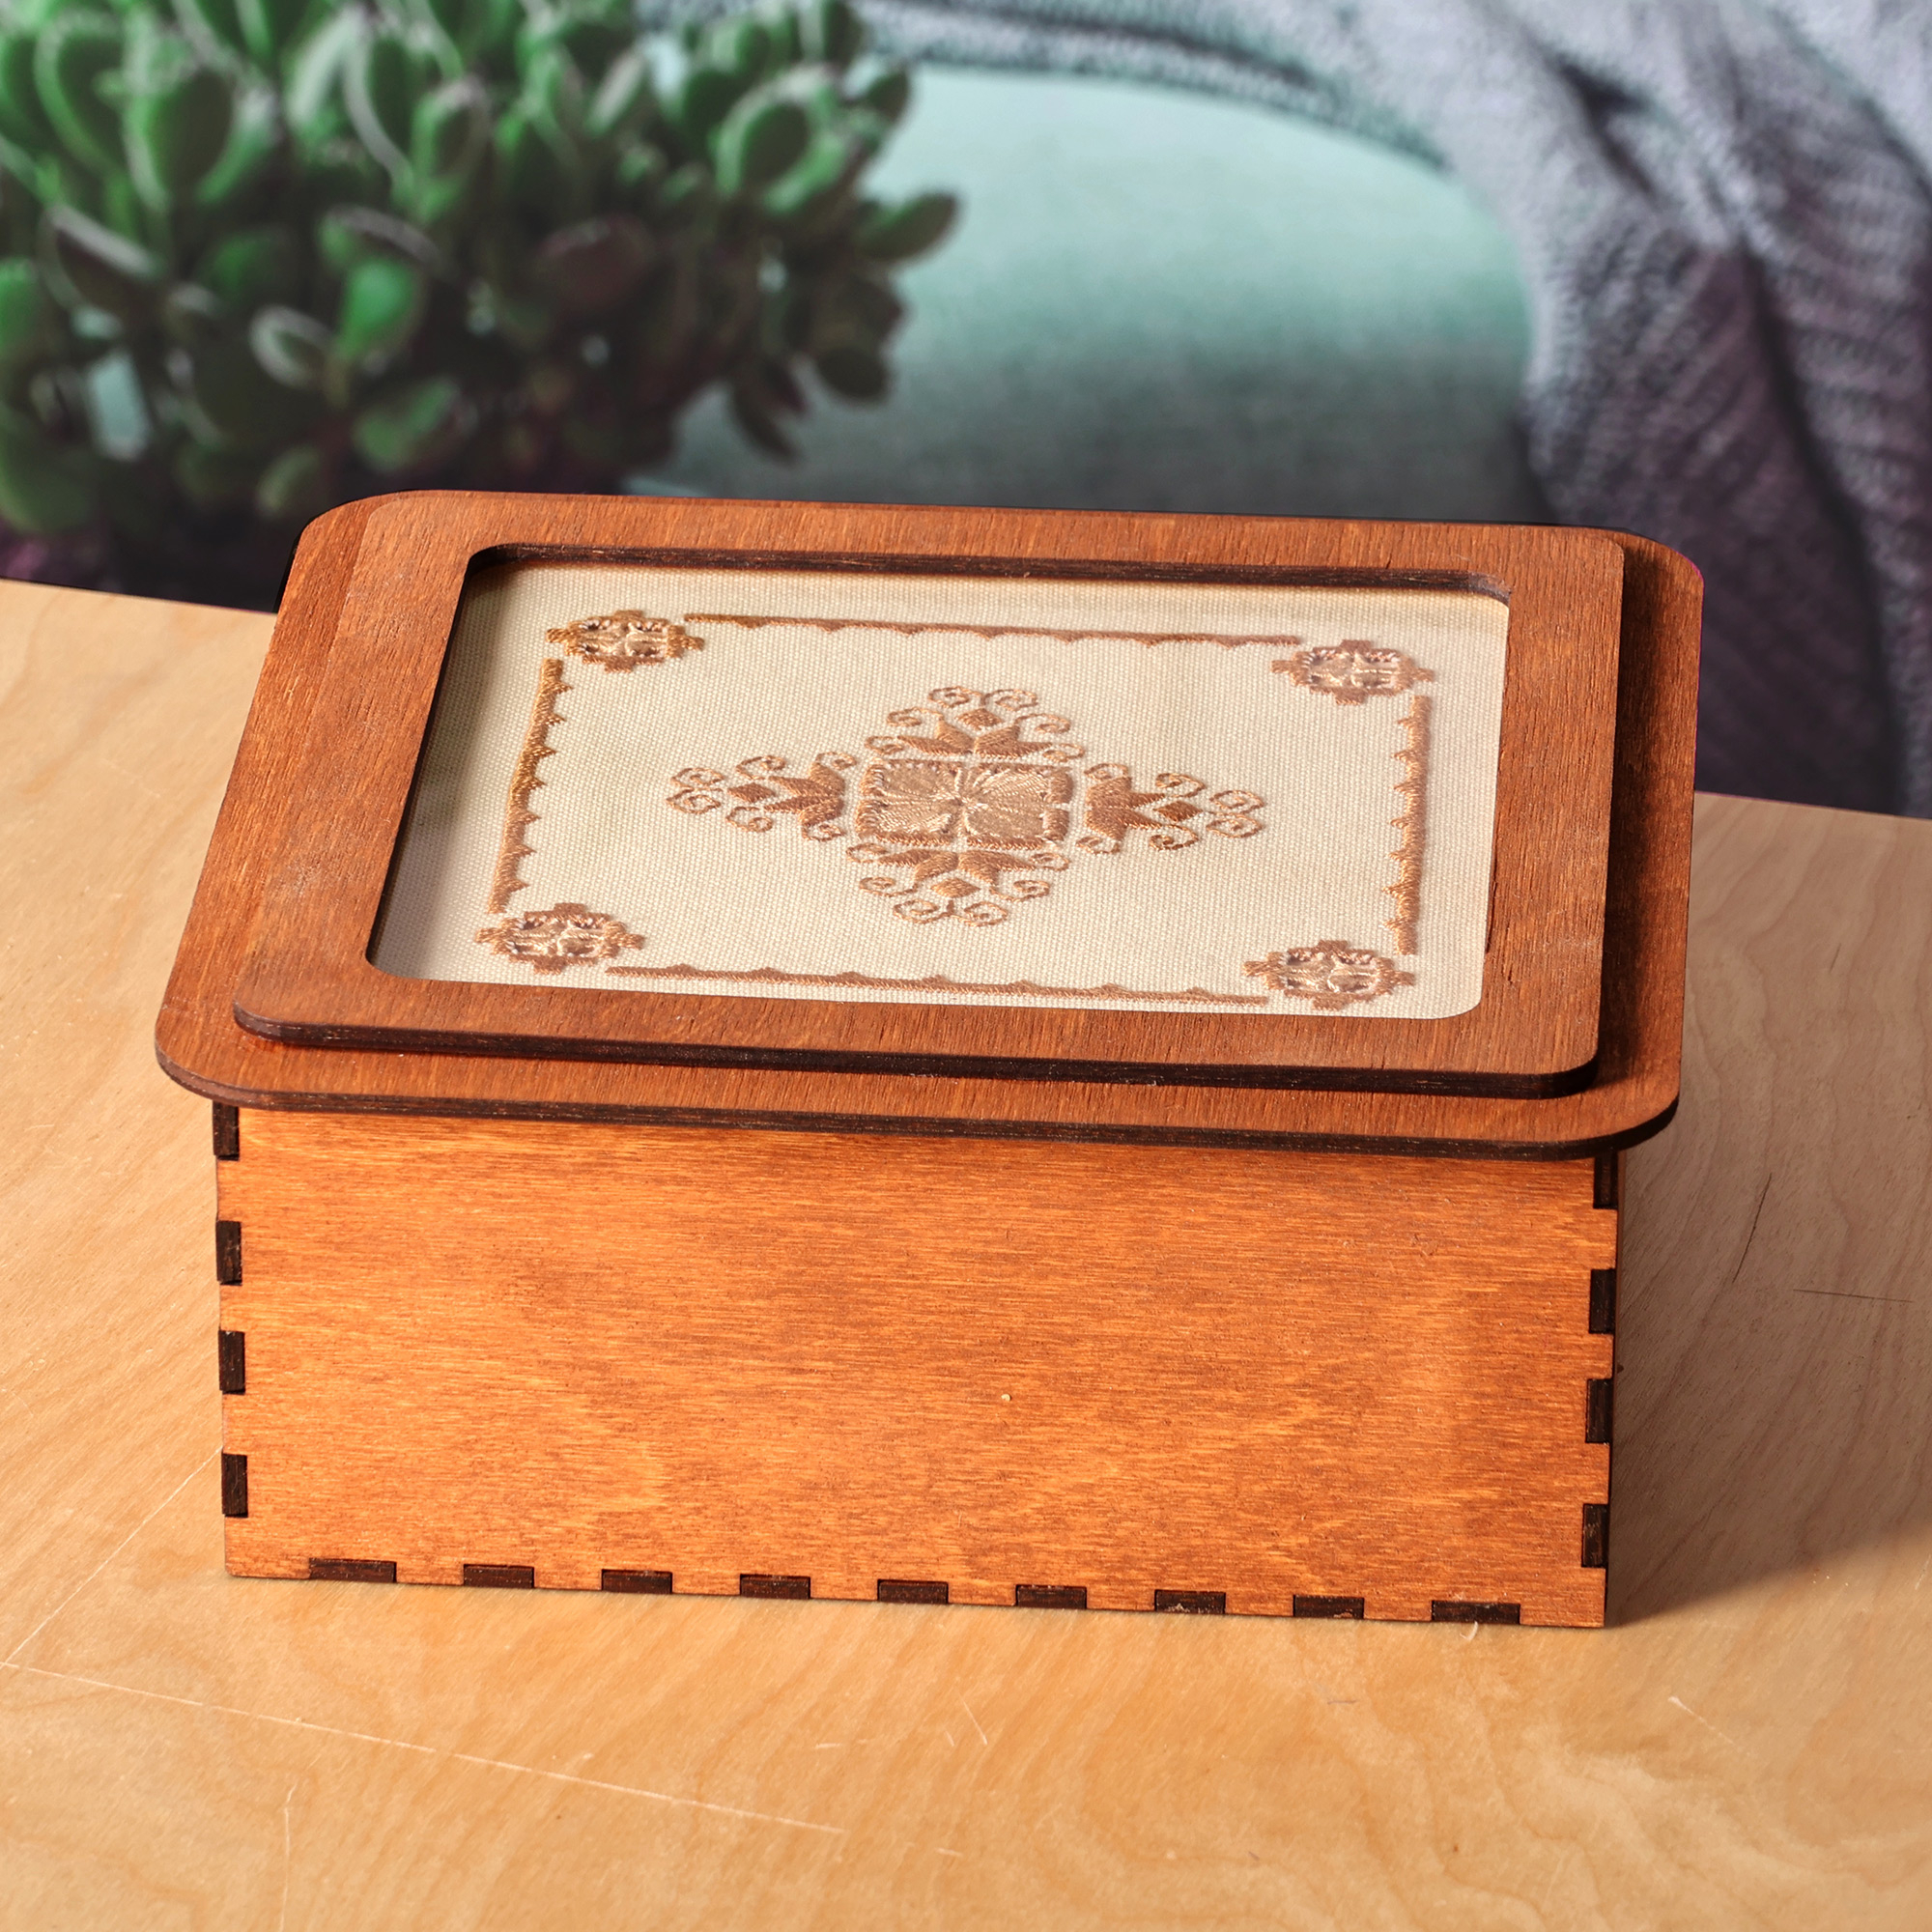 Handmade Wood Jewelry Box Topped by Cotton Embroidered Motif - Charming  Lotus